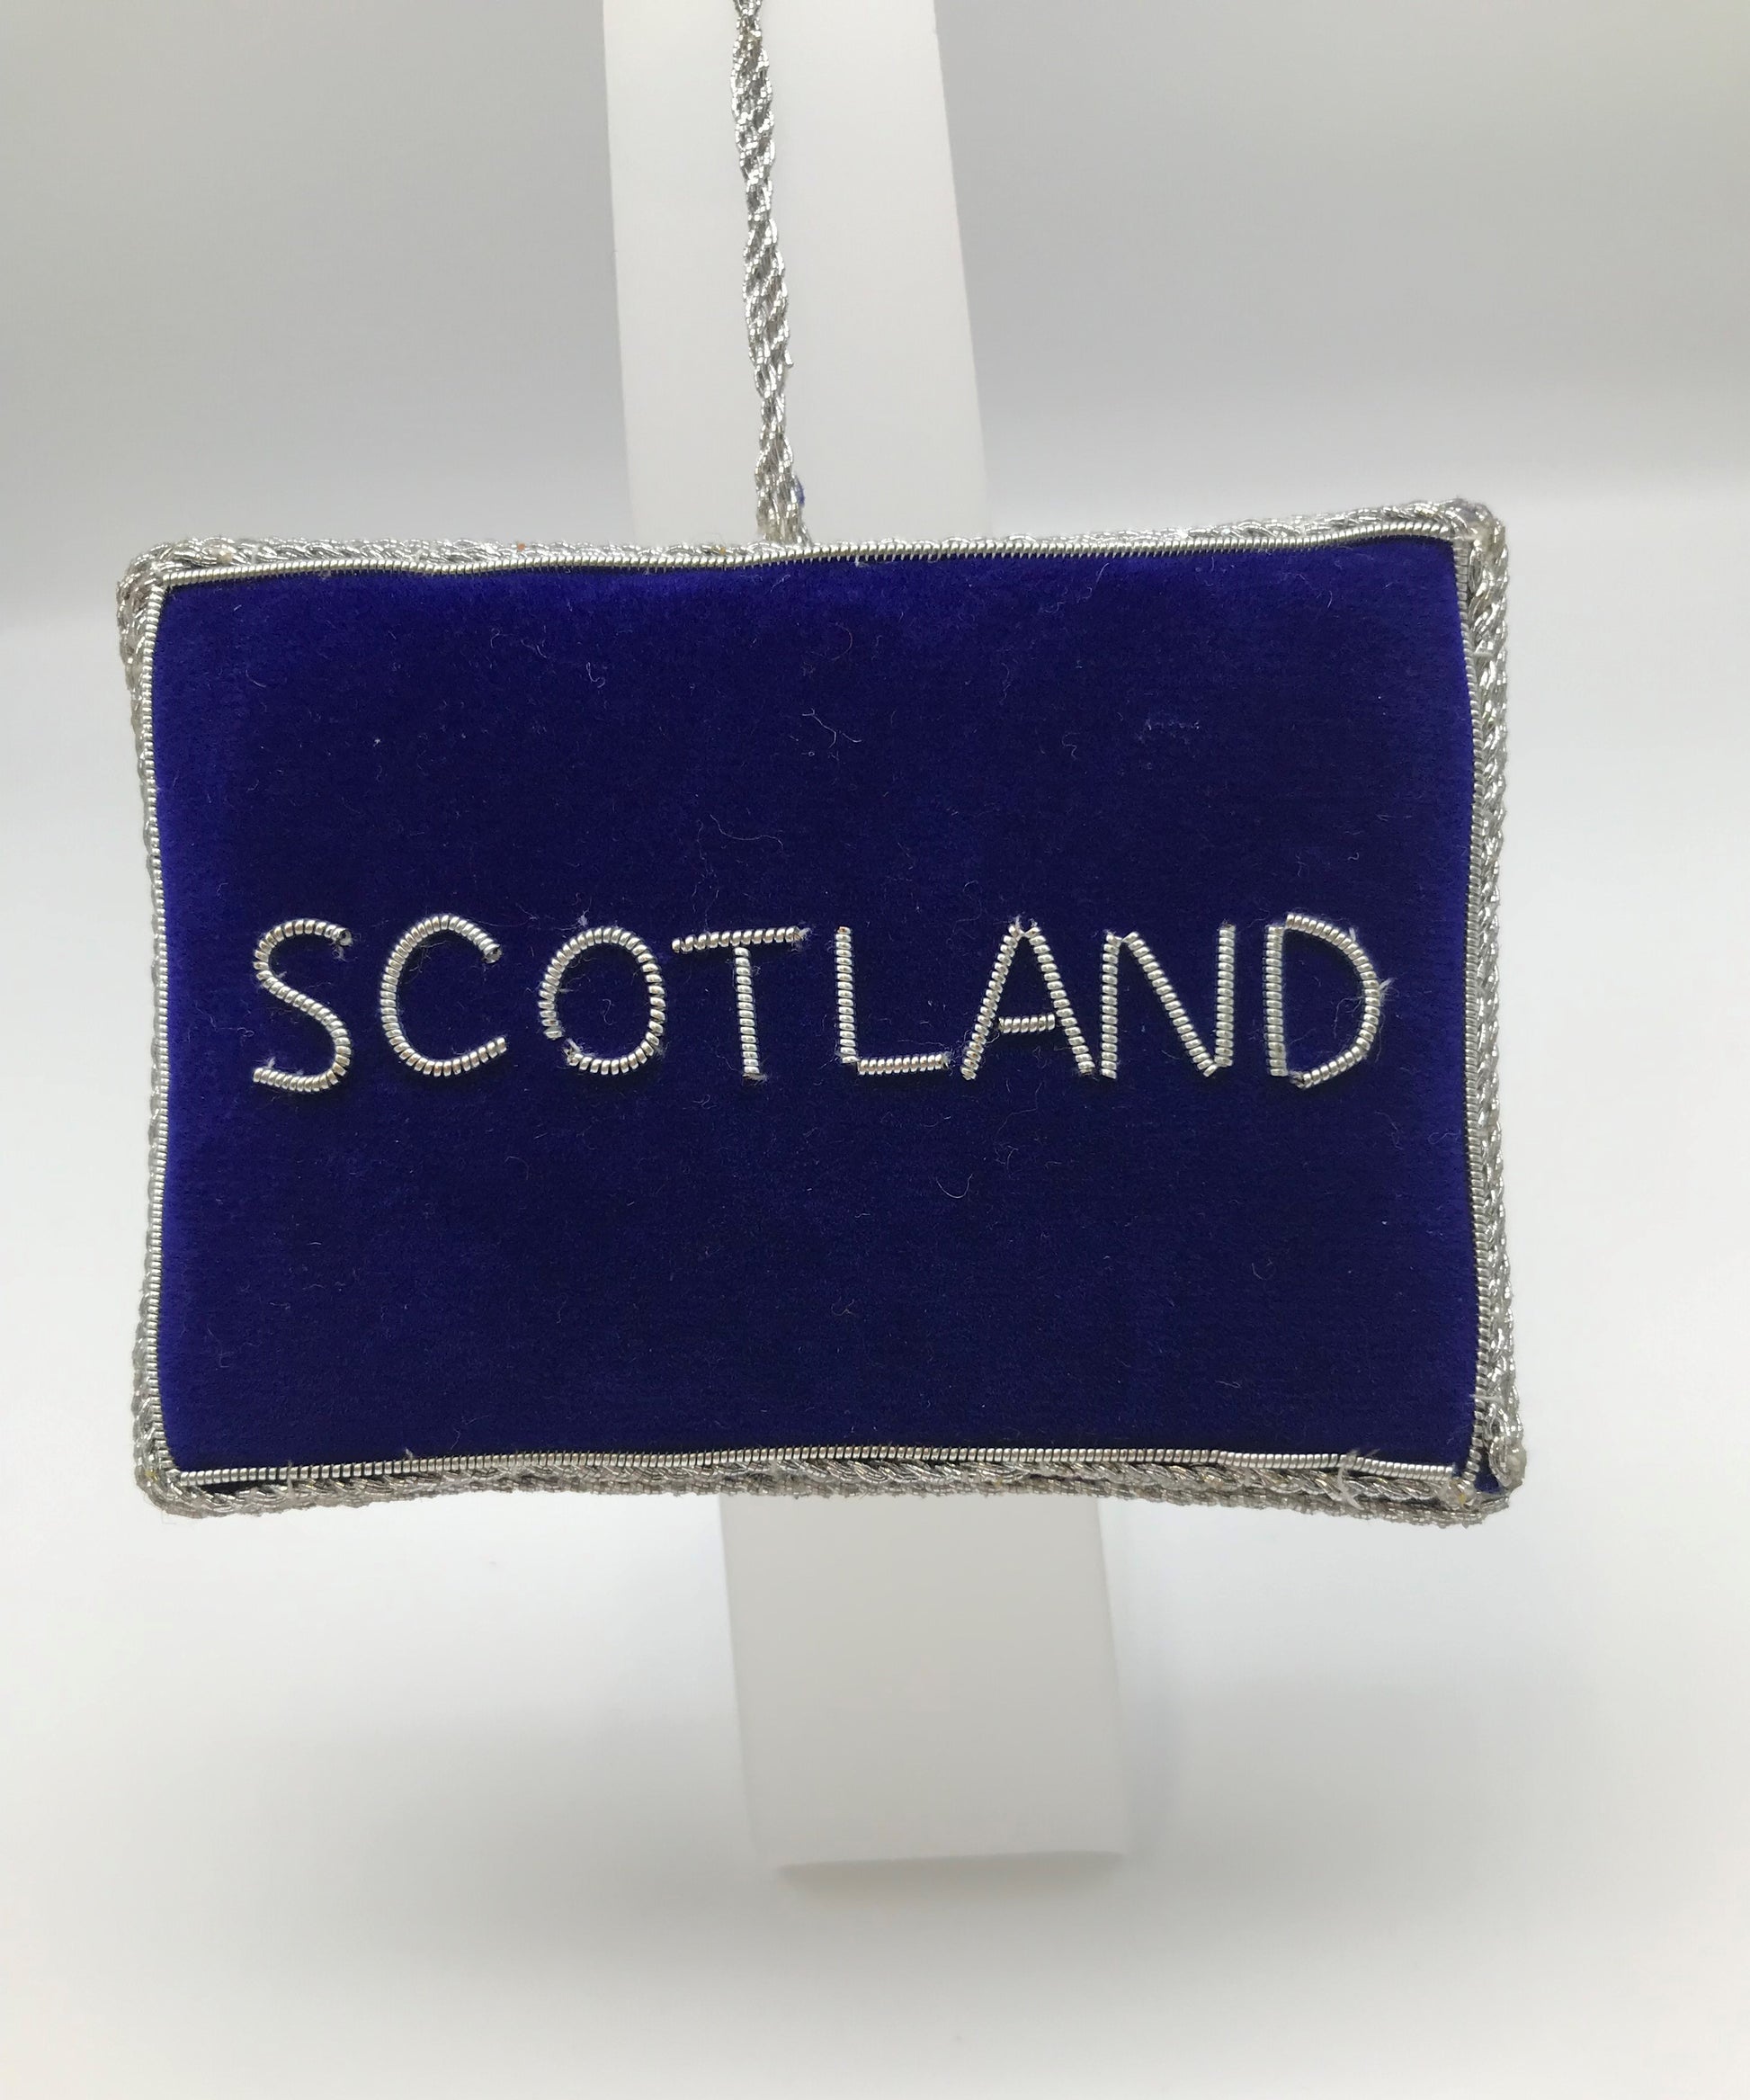 Rectangular decoration in dark blue fabric with Scotland embroidered in silver and silver stitching. 